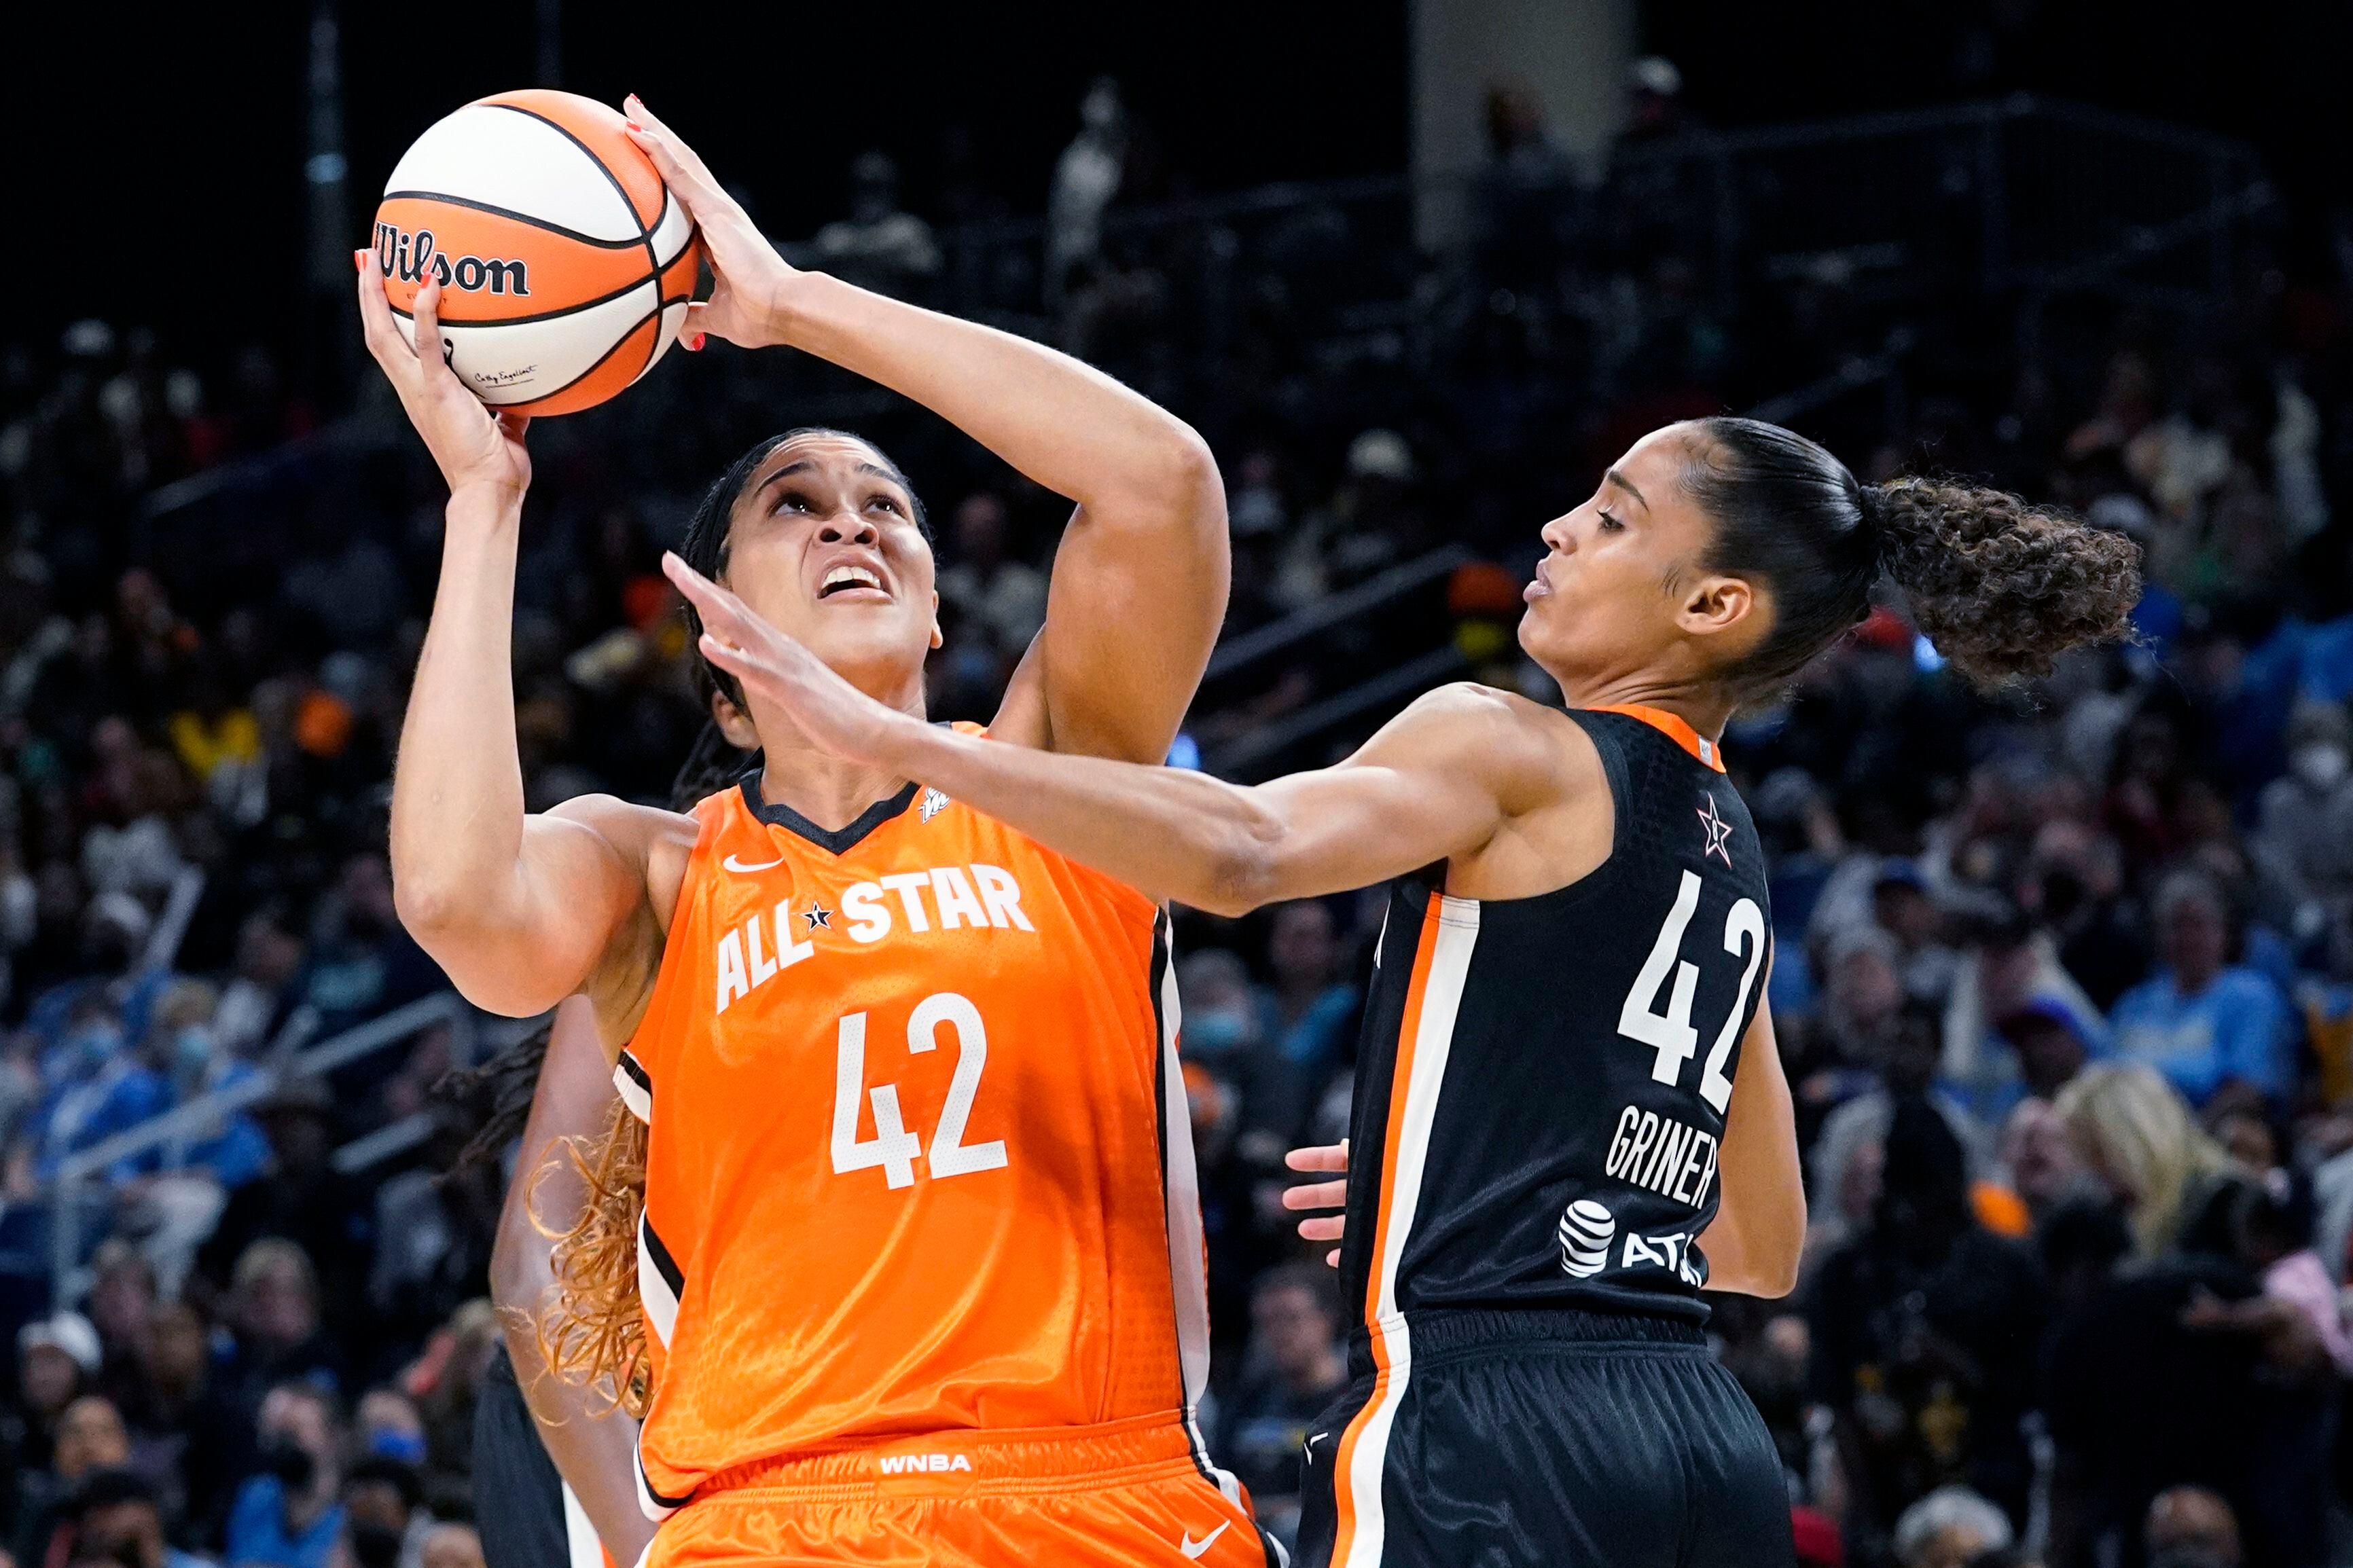 WNBA honours Brittney Griner with BG 42 decal on all team courts